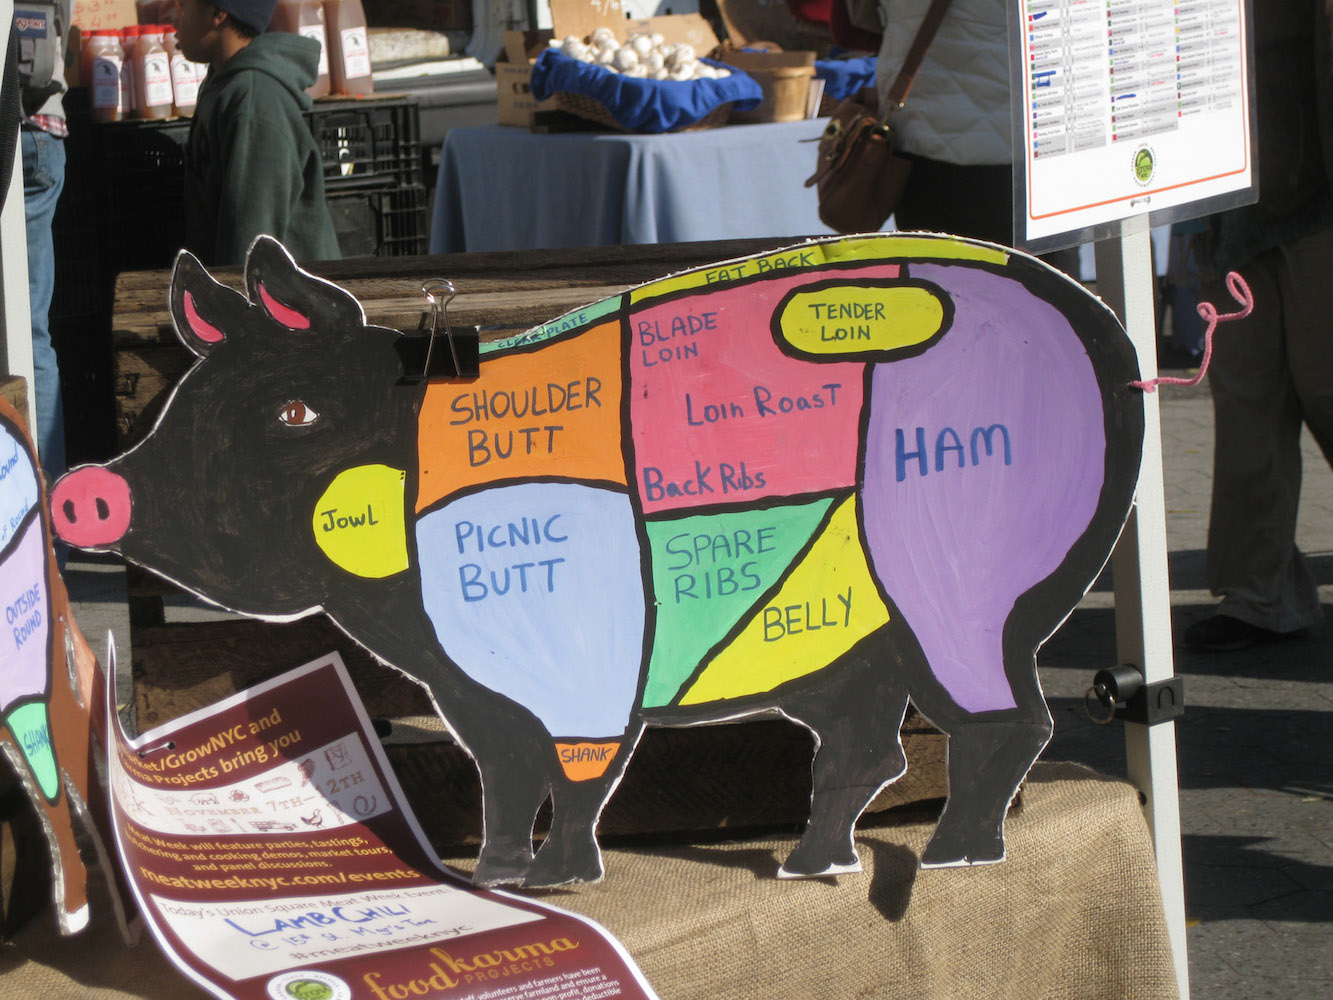 Image presents a cutout of a stylized pig with sections of the animal annotated with labels such as: “Jowl,” “Shoulder Butt,” “Ham,” and “Belly.”